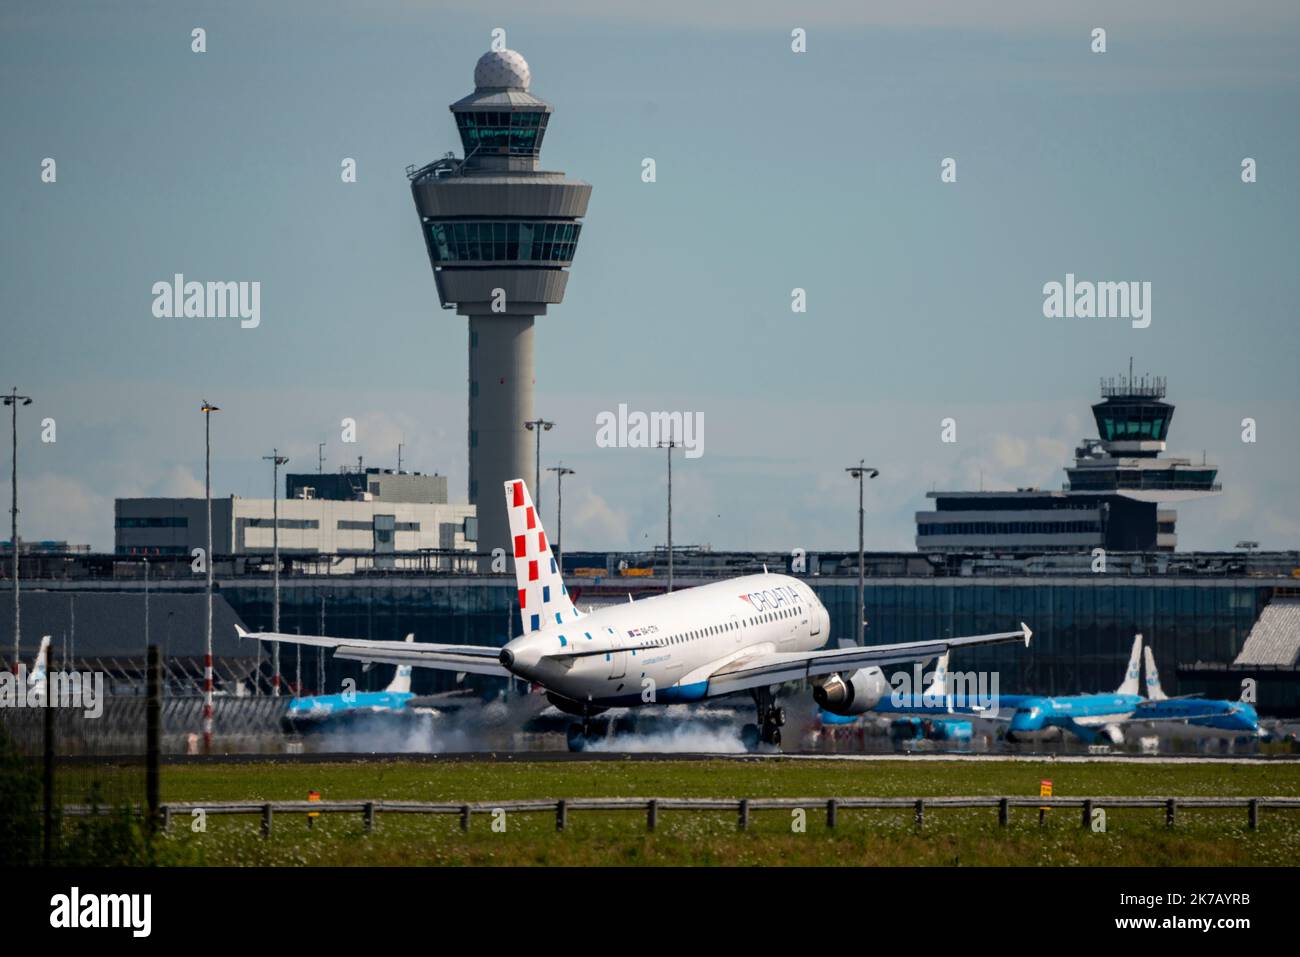 Amsterdam Schiphol Airport, AMS, aircraft approaching Kaagbaan, runway, terminal building, air traffic control tower, 9A-CTH, Croatia Airlines Airbus Stock Photo